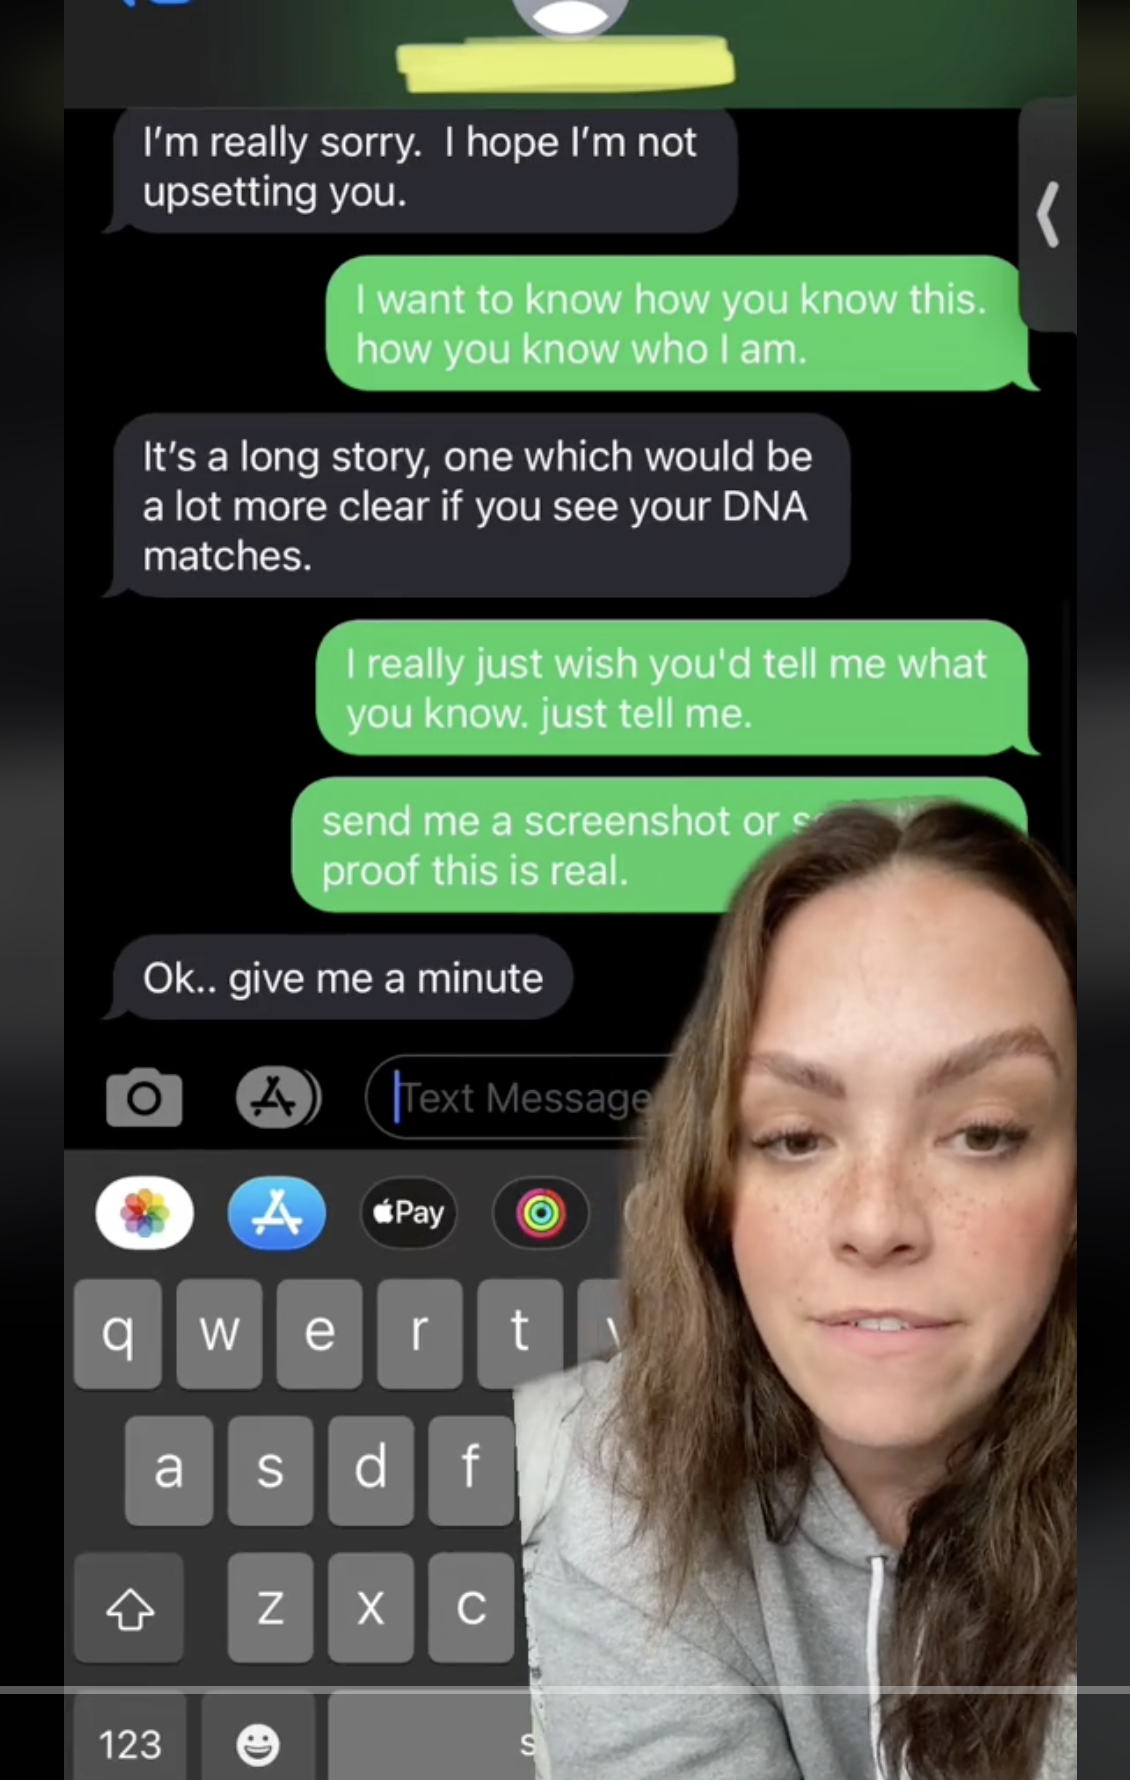 TikToker Lane Fontana shares screenshots of the messages she received, prompting her to take the DNA test | Source: tiktok.com/@laneiscool14